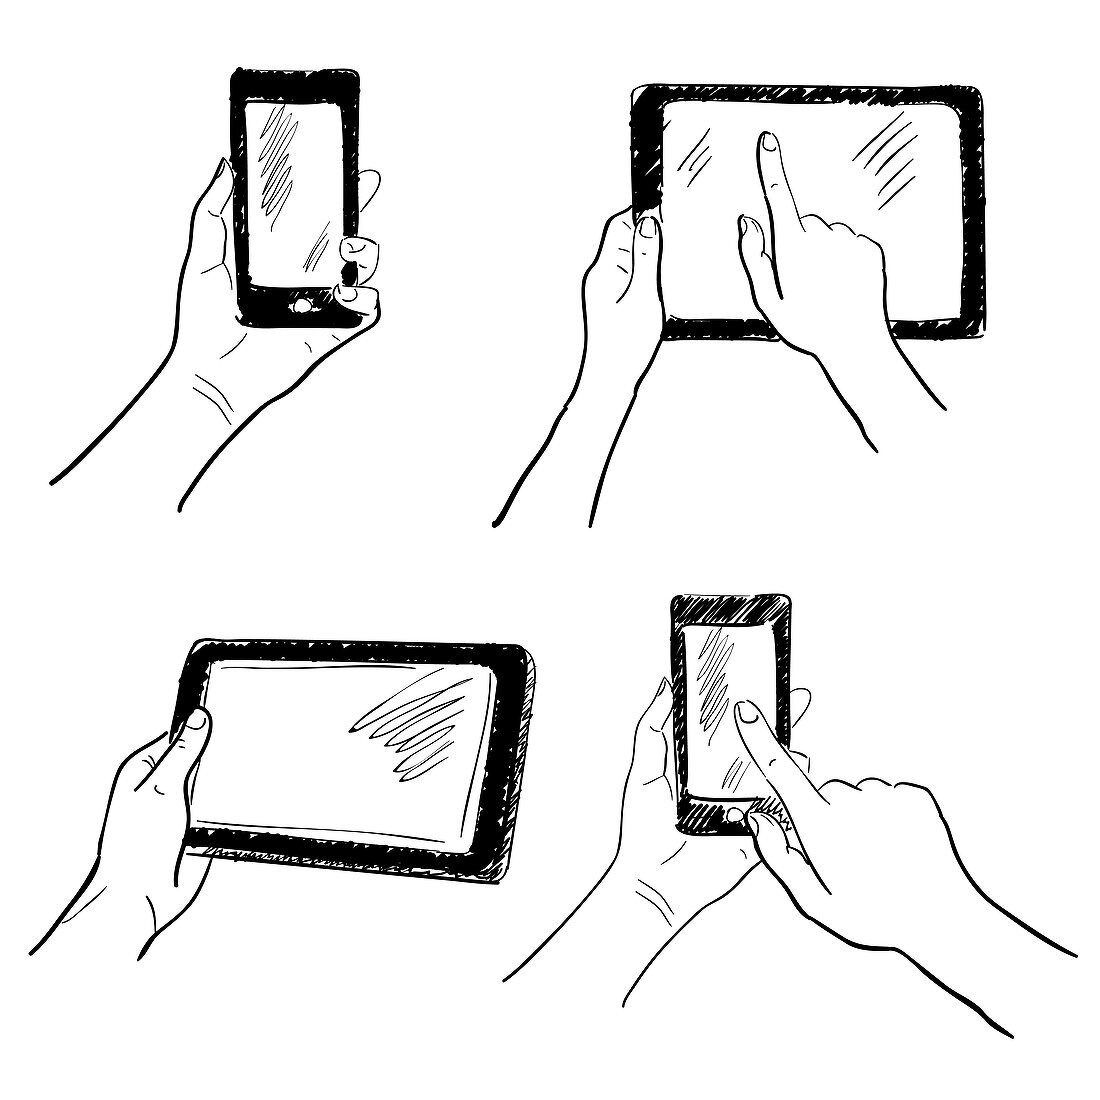 Touchscreen devices, illustration